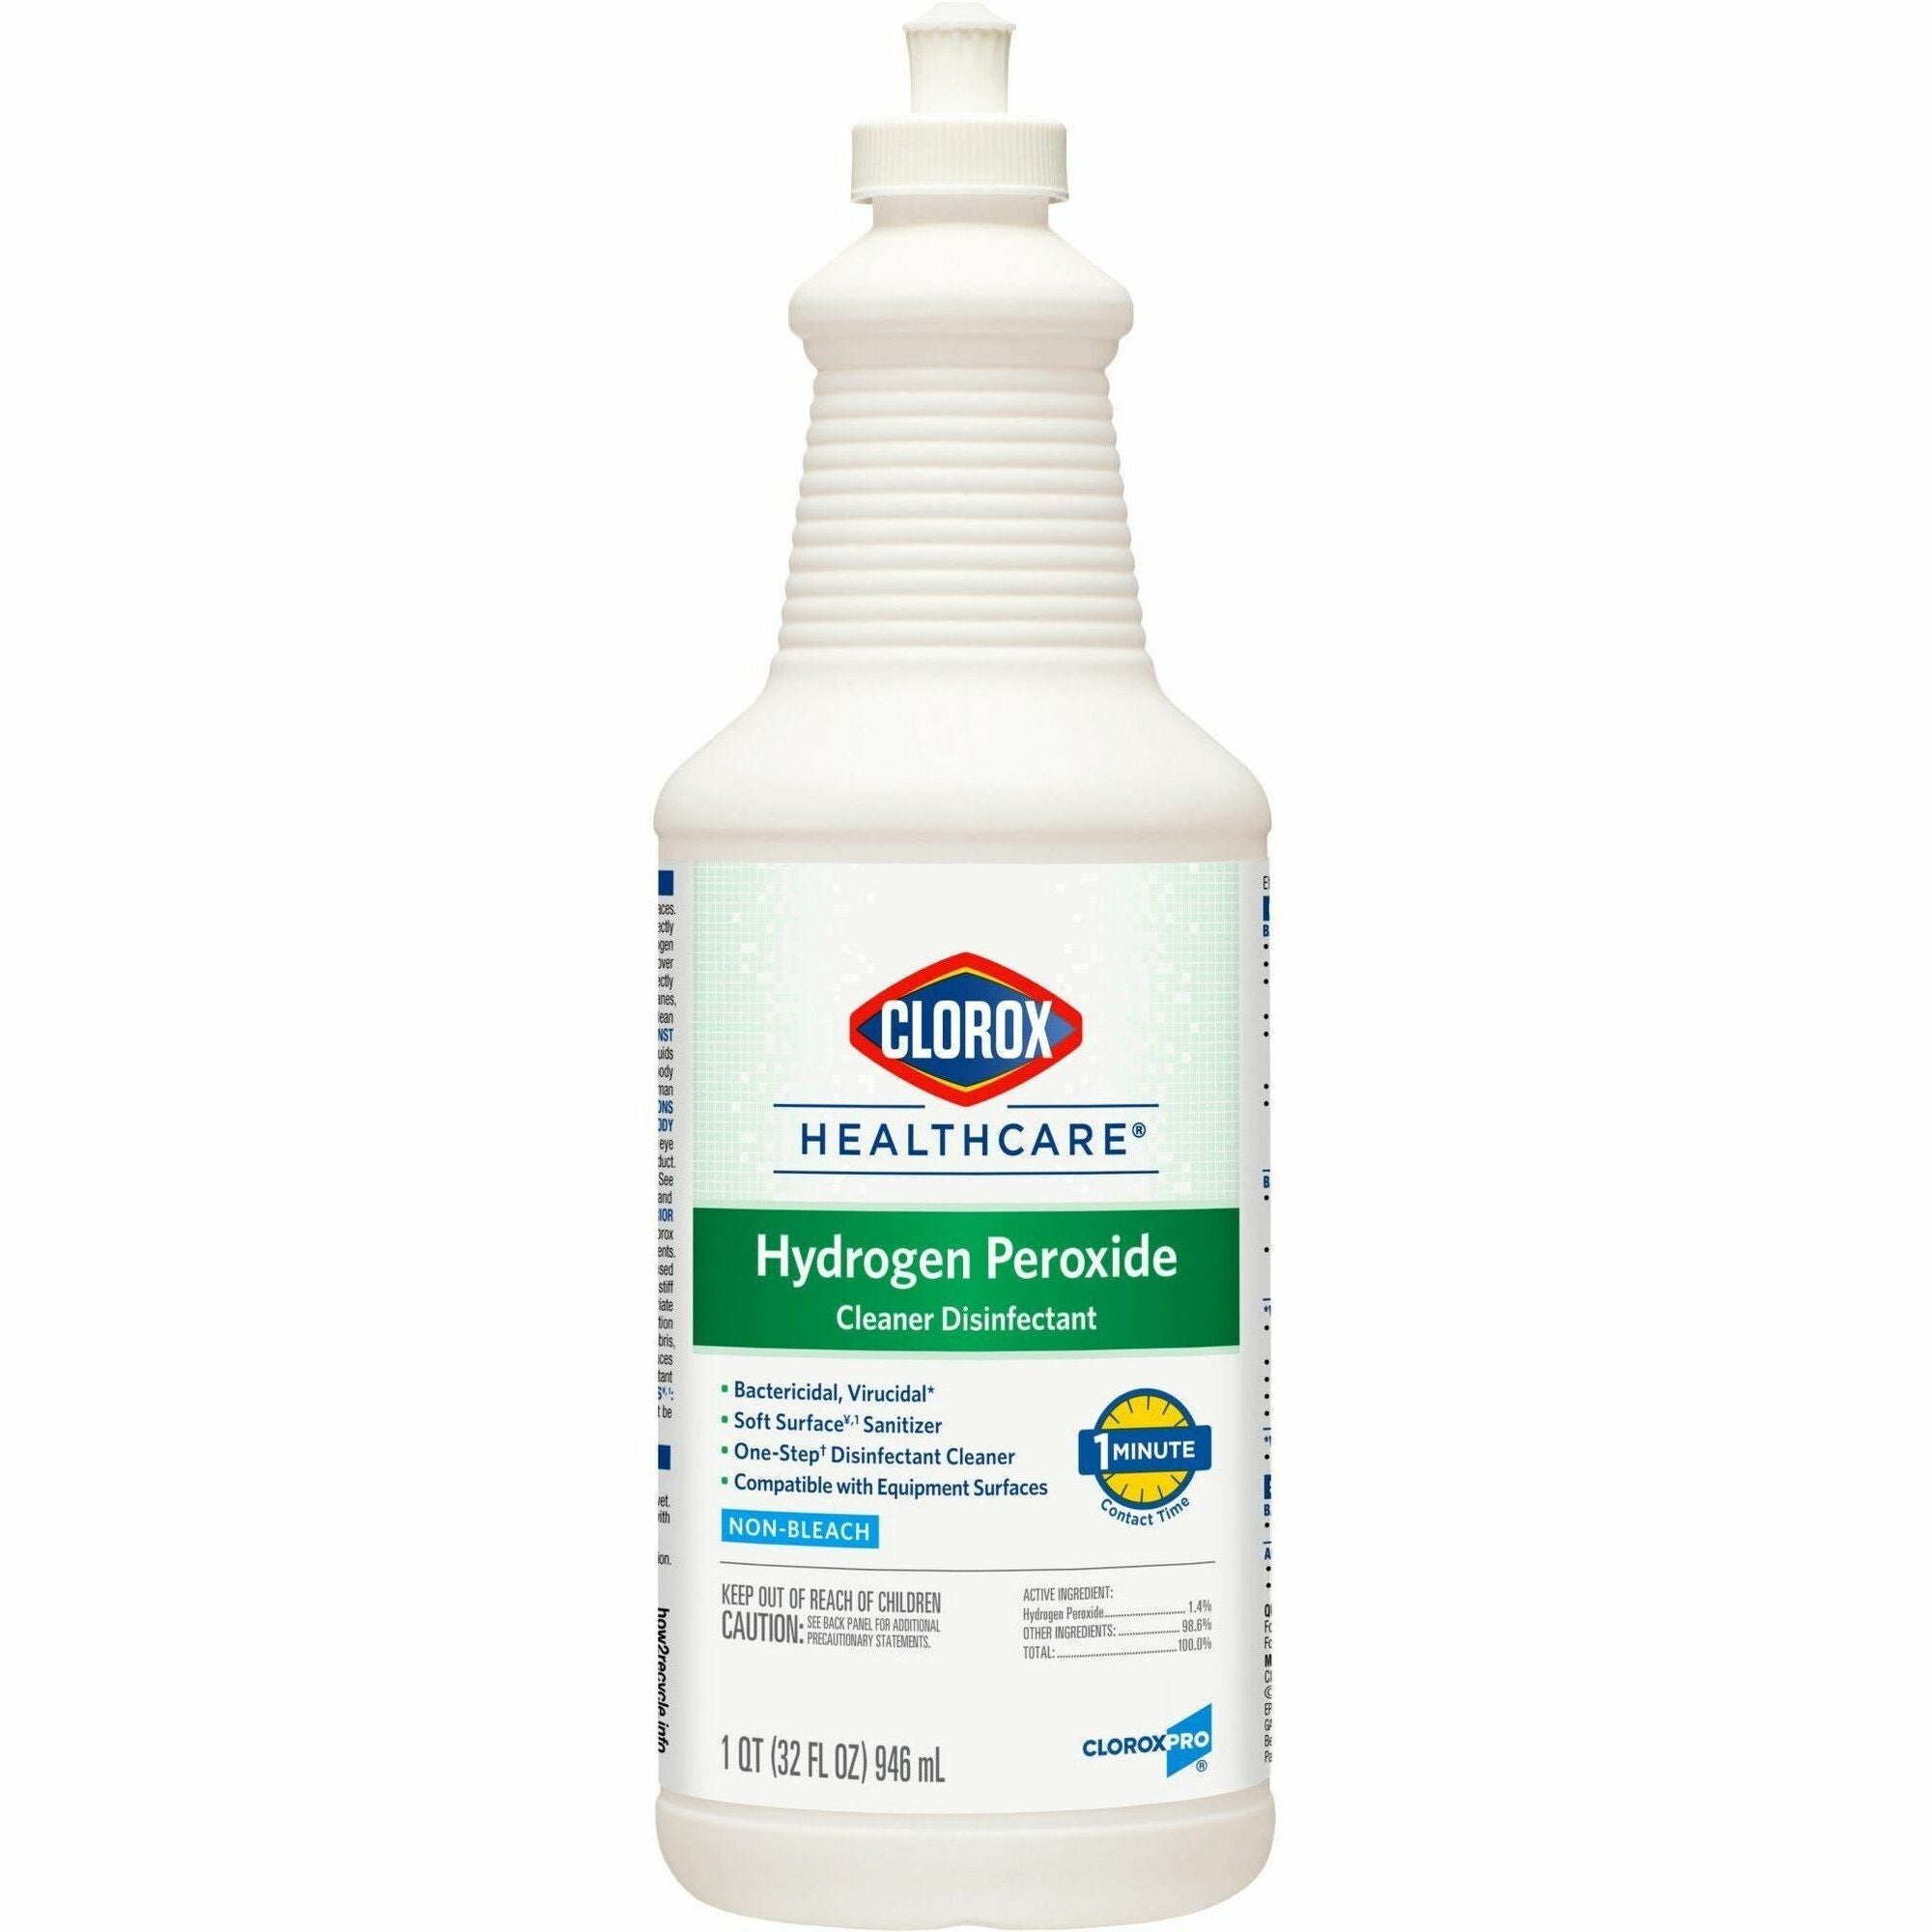 Clorox Healthcare Pull-Top Hydrogen Peroxide Cleaner Disinfectant - Ready-To-Use - 32 fl oz (1 quart) - 1 Each - Disinfectant, Anti-bacterial - Clear - 1